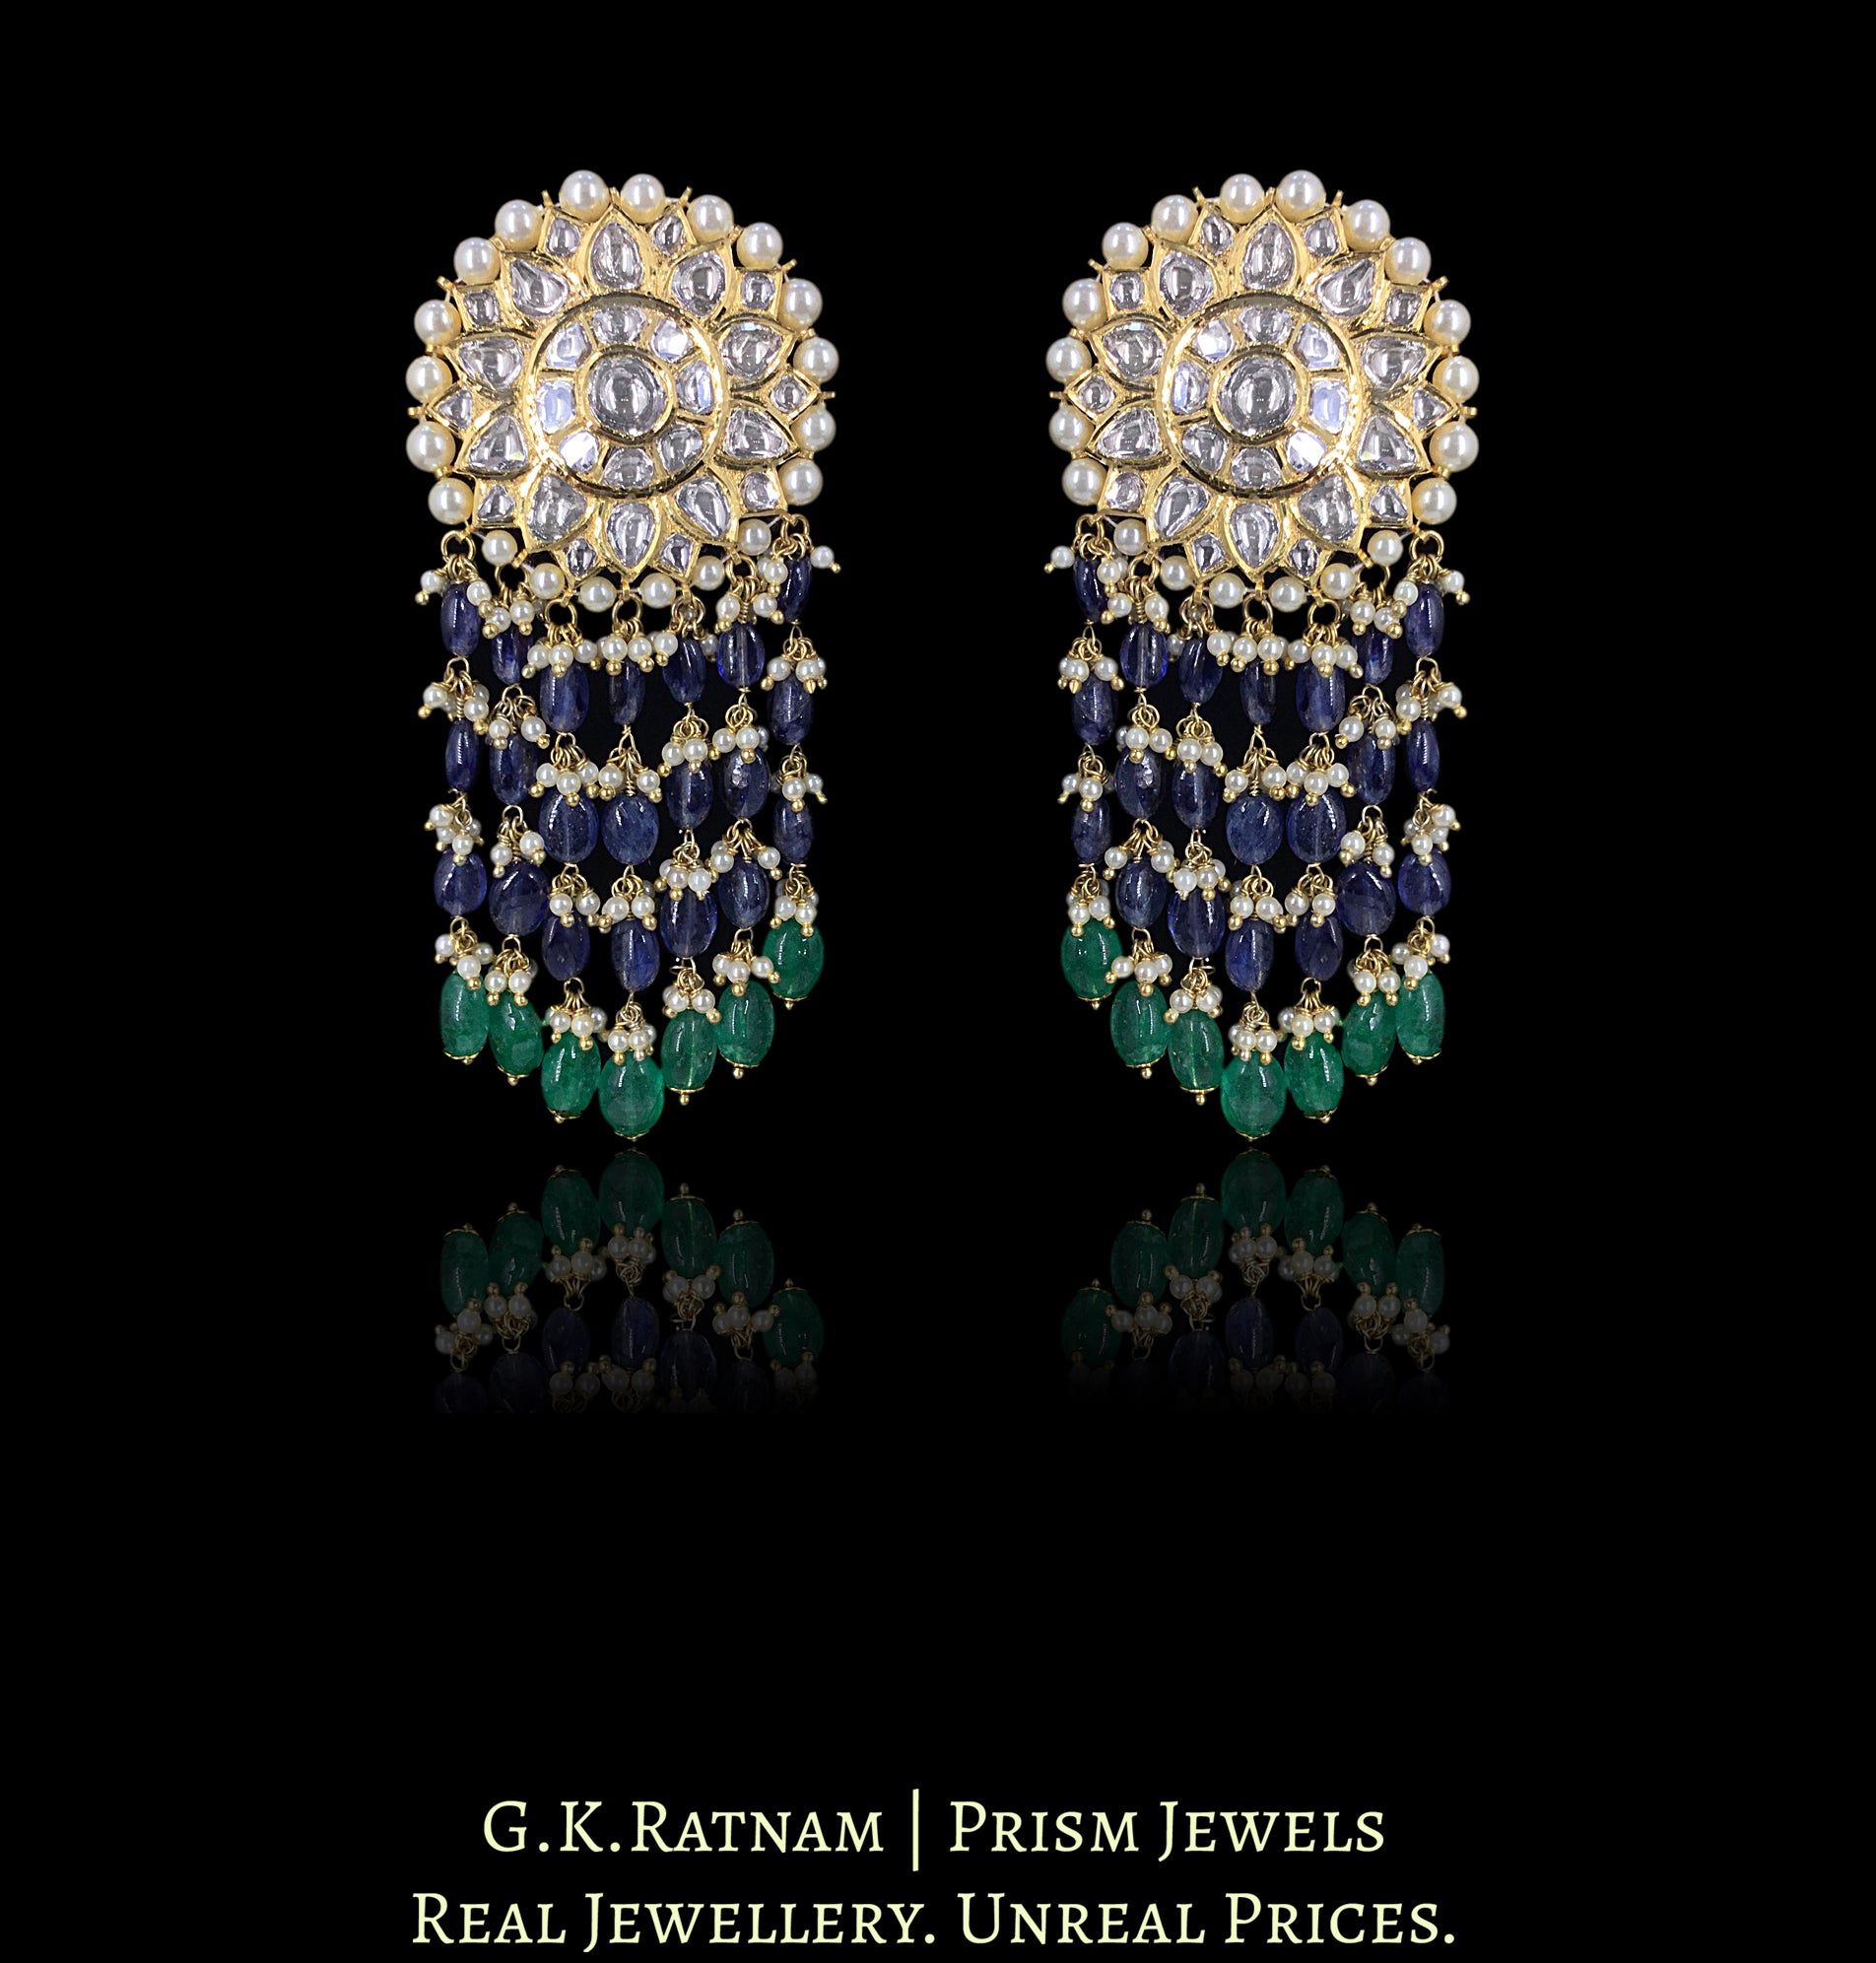 18k Gold and Diamond Polki Karnfool Earring Pair with Blue Sapphires, Beryls and Freshwater Pearls